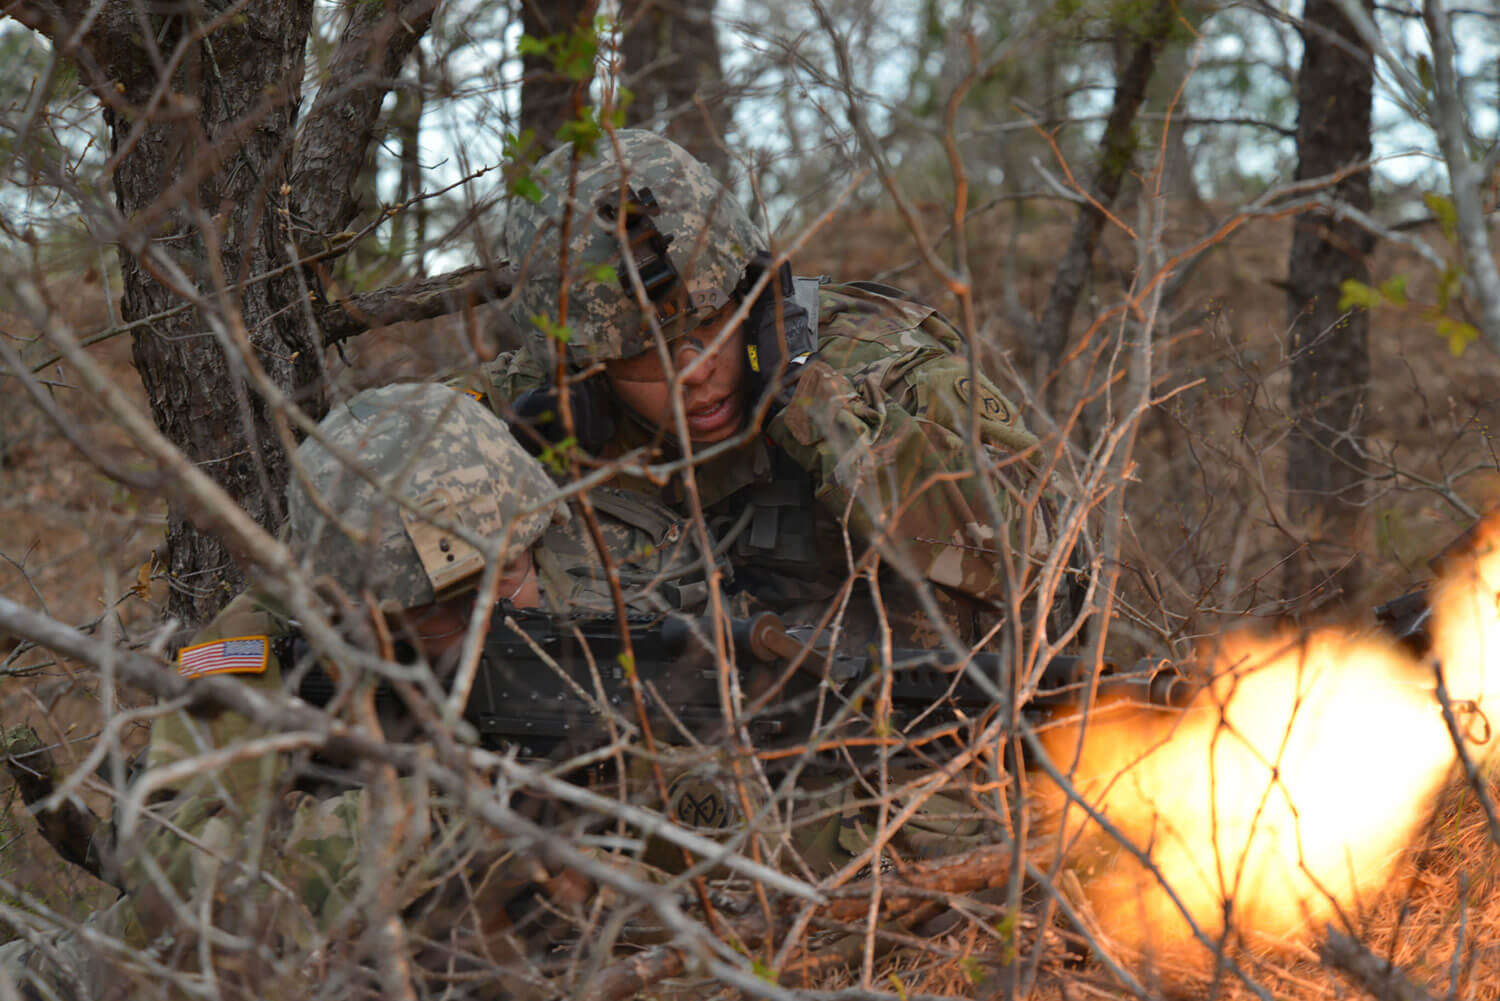 Soldiers from the 182nd Infantry Regiment, Massachusetts National Guard use scrub brush for concealment as they fire an M240 machine gun at a notional enemy during a training exercise at Joint Base Cape Cod, May 5, 2018. Over the course of four days, the Massachusetts Guard Soldiers conducted air assault raids using aviation assets provided by the New York National Guard. Massachusetts Army National Guard photo by SPC Samuel D. Keenan